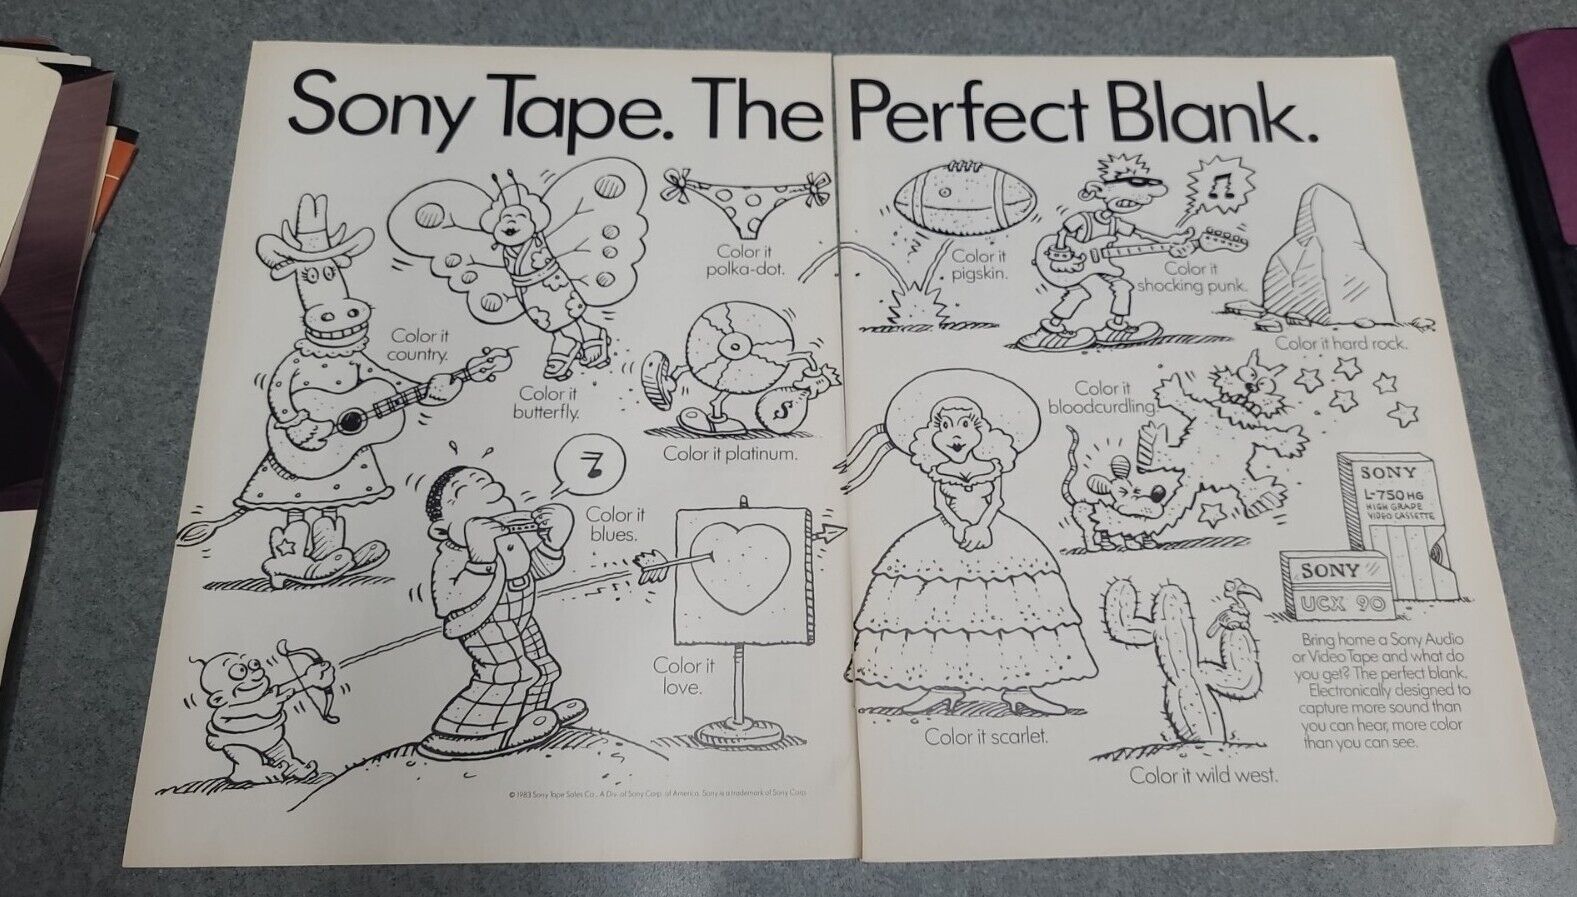 Sony Tape The Perfect Blank Print Ad 1983 Ucx90 L-750 Hg